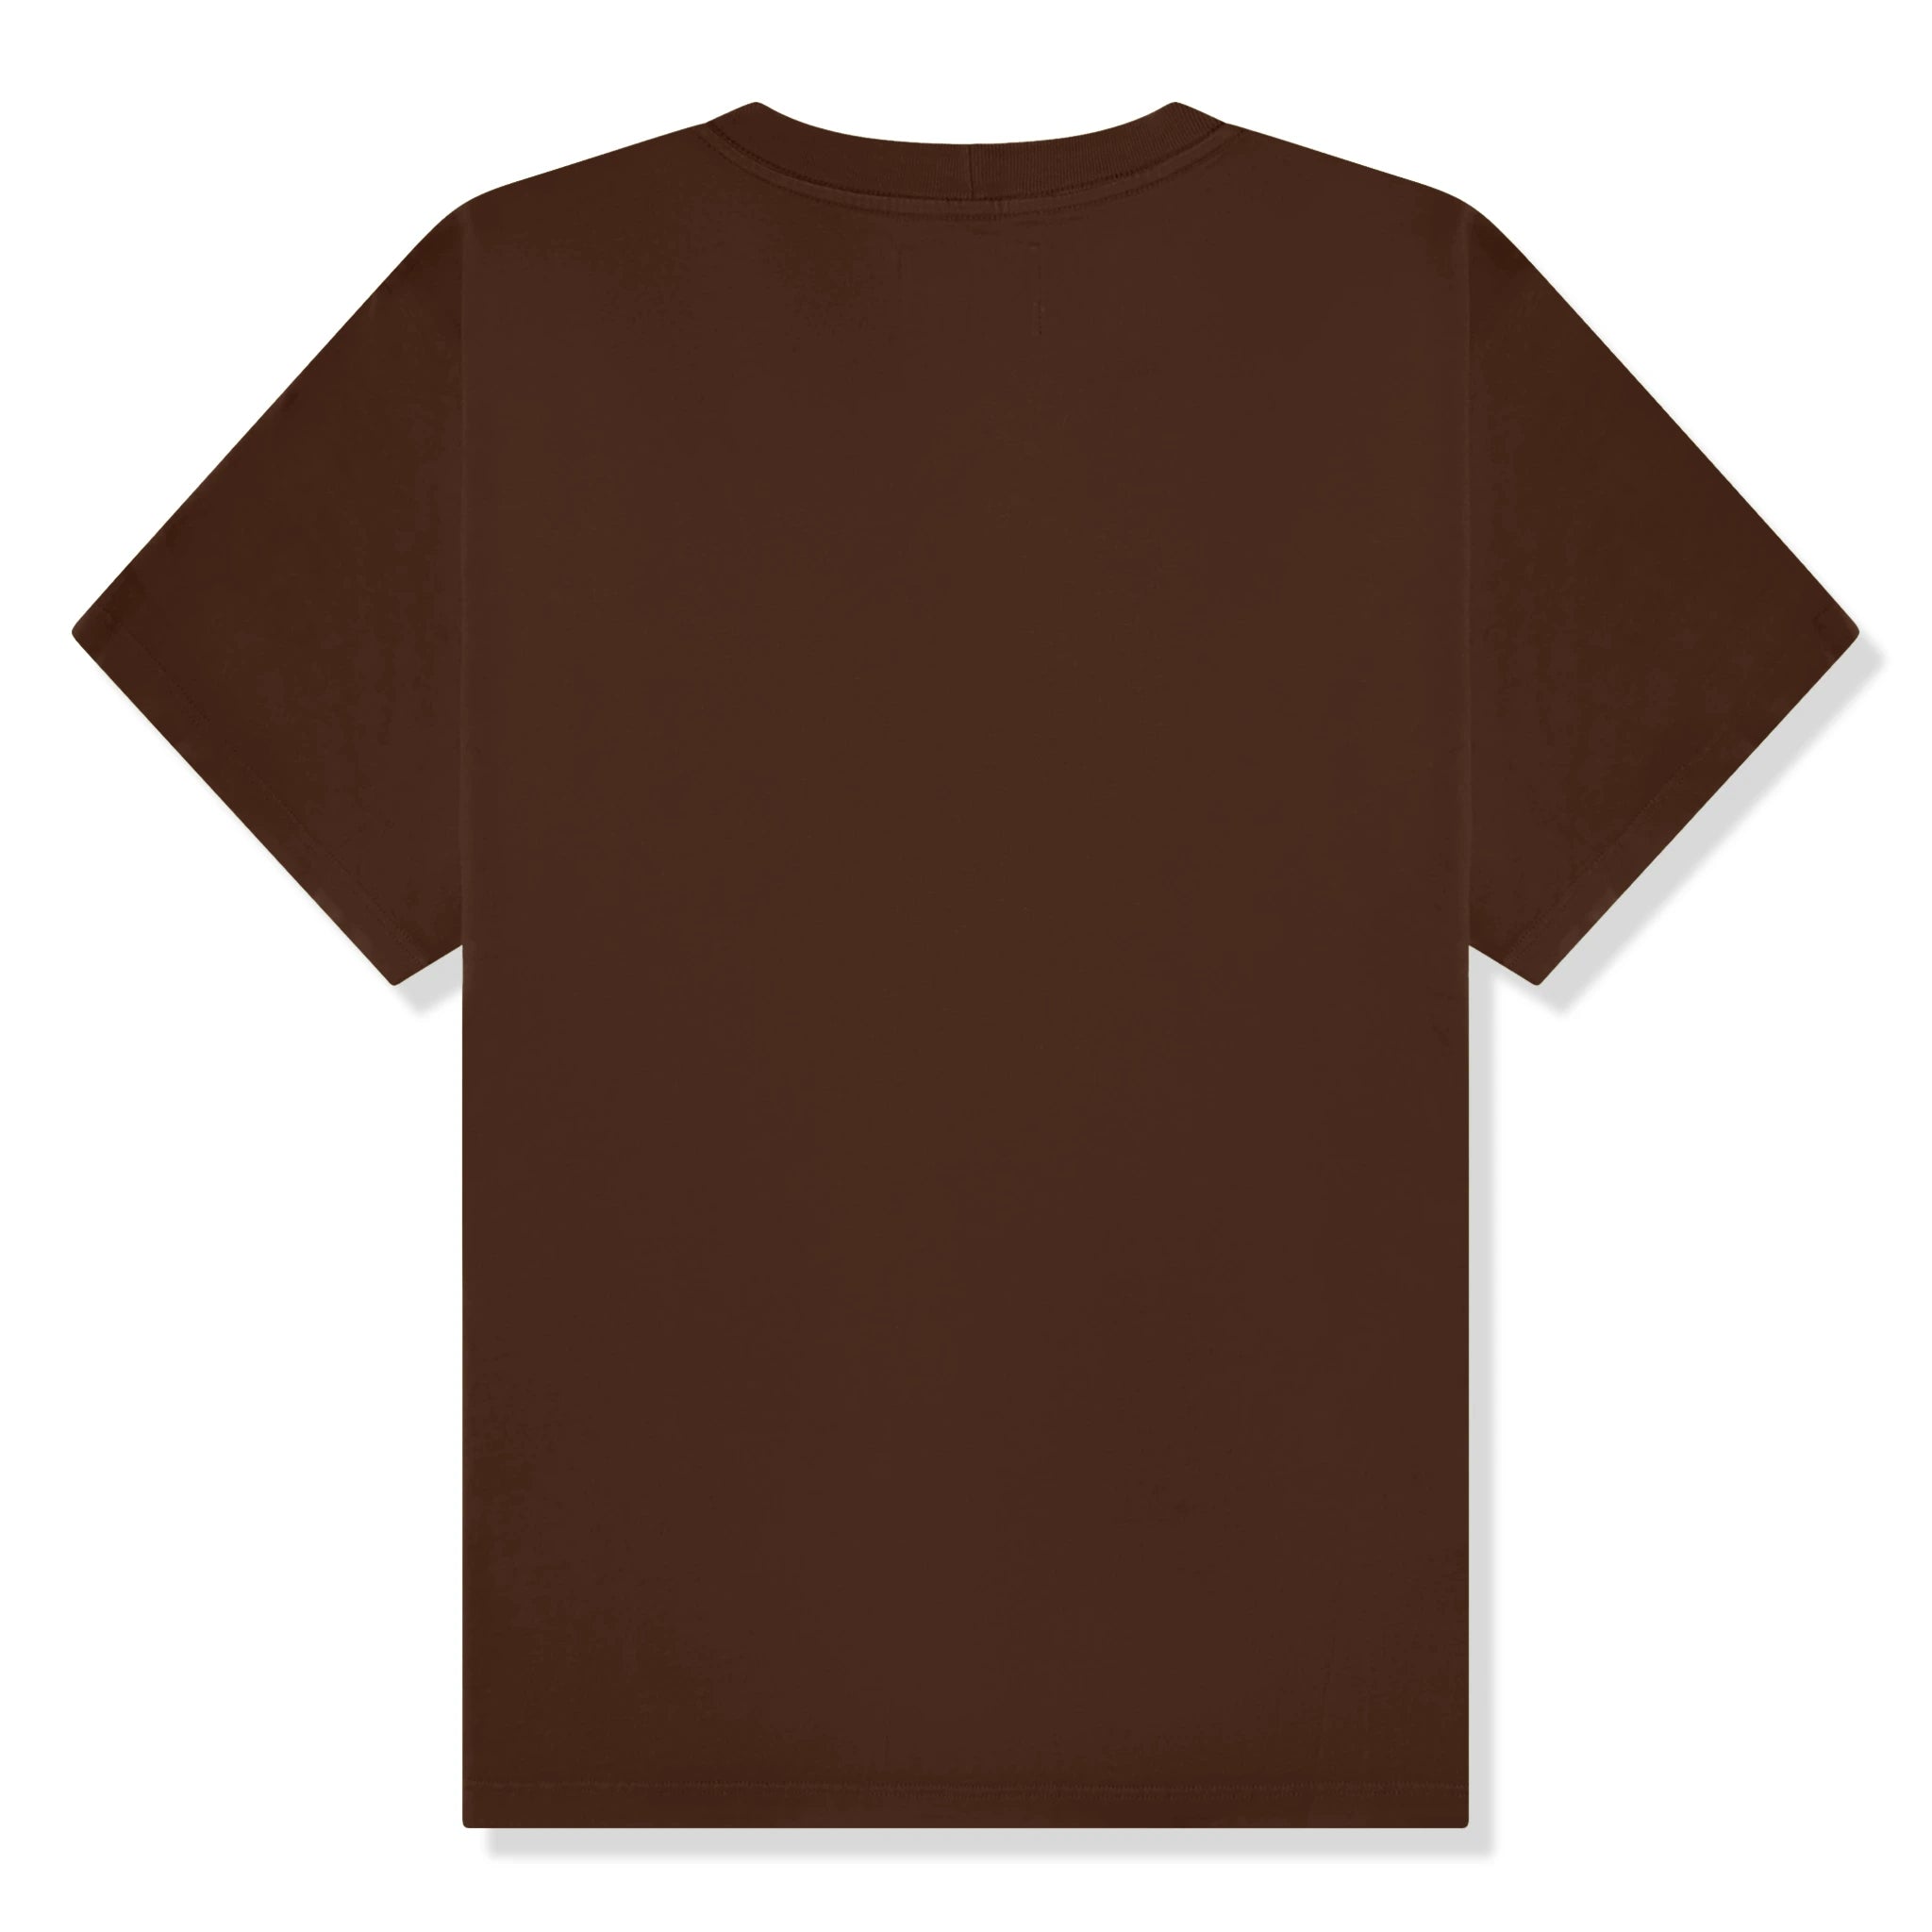 Back view of Eric Emanuel EE Basic Brown T Shirt